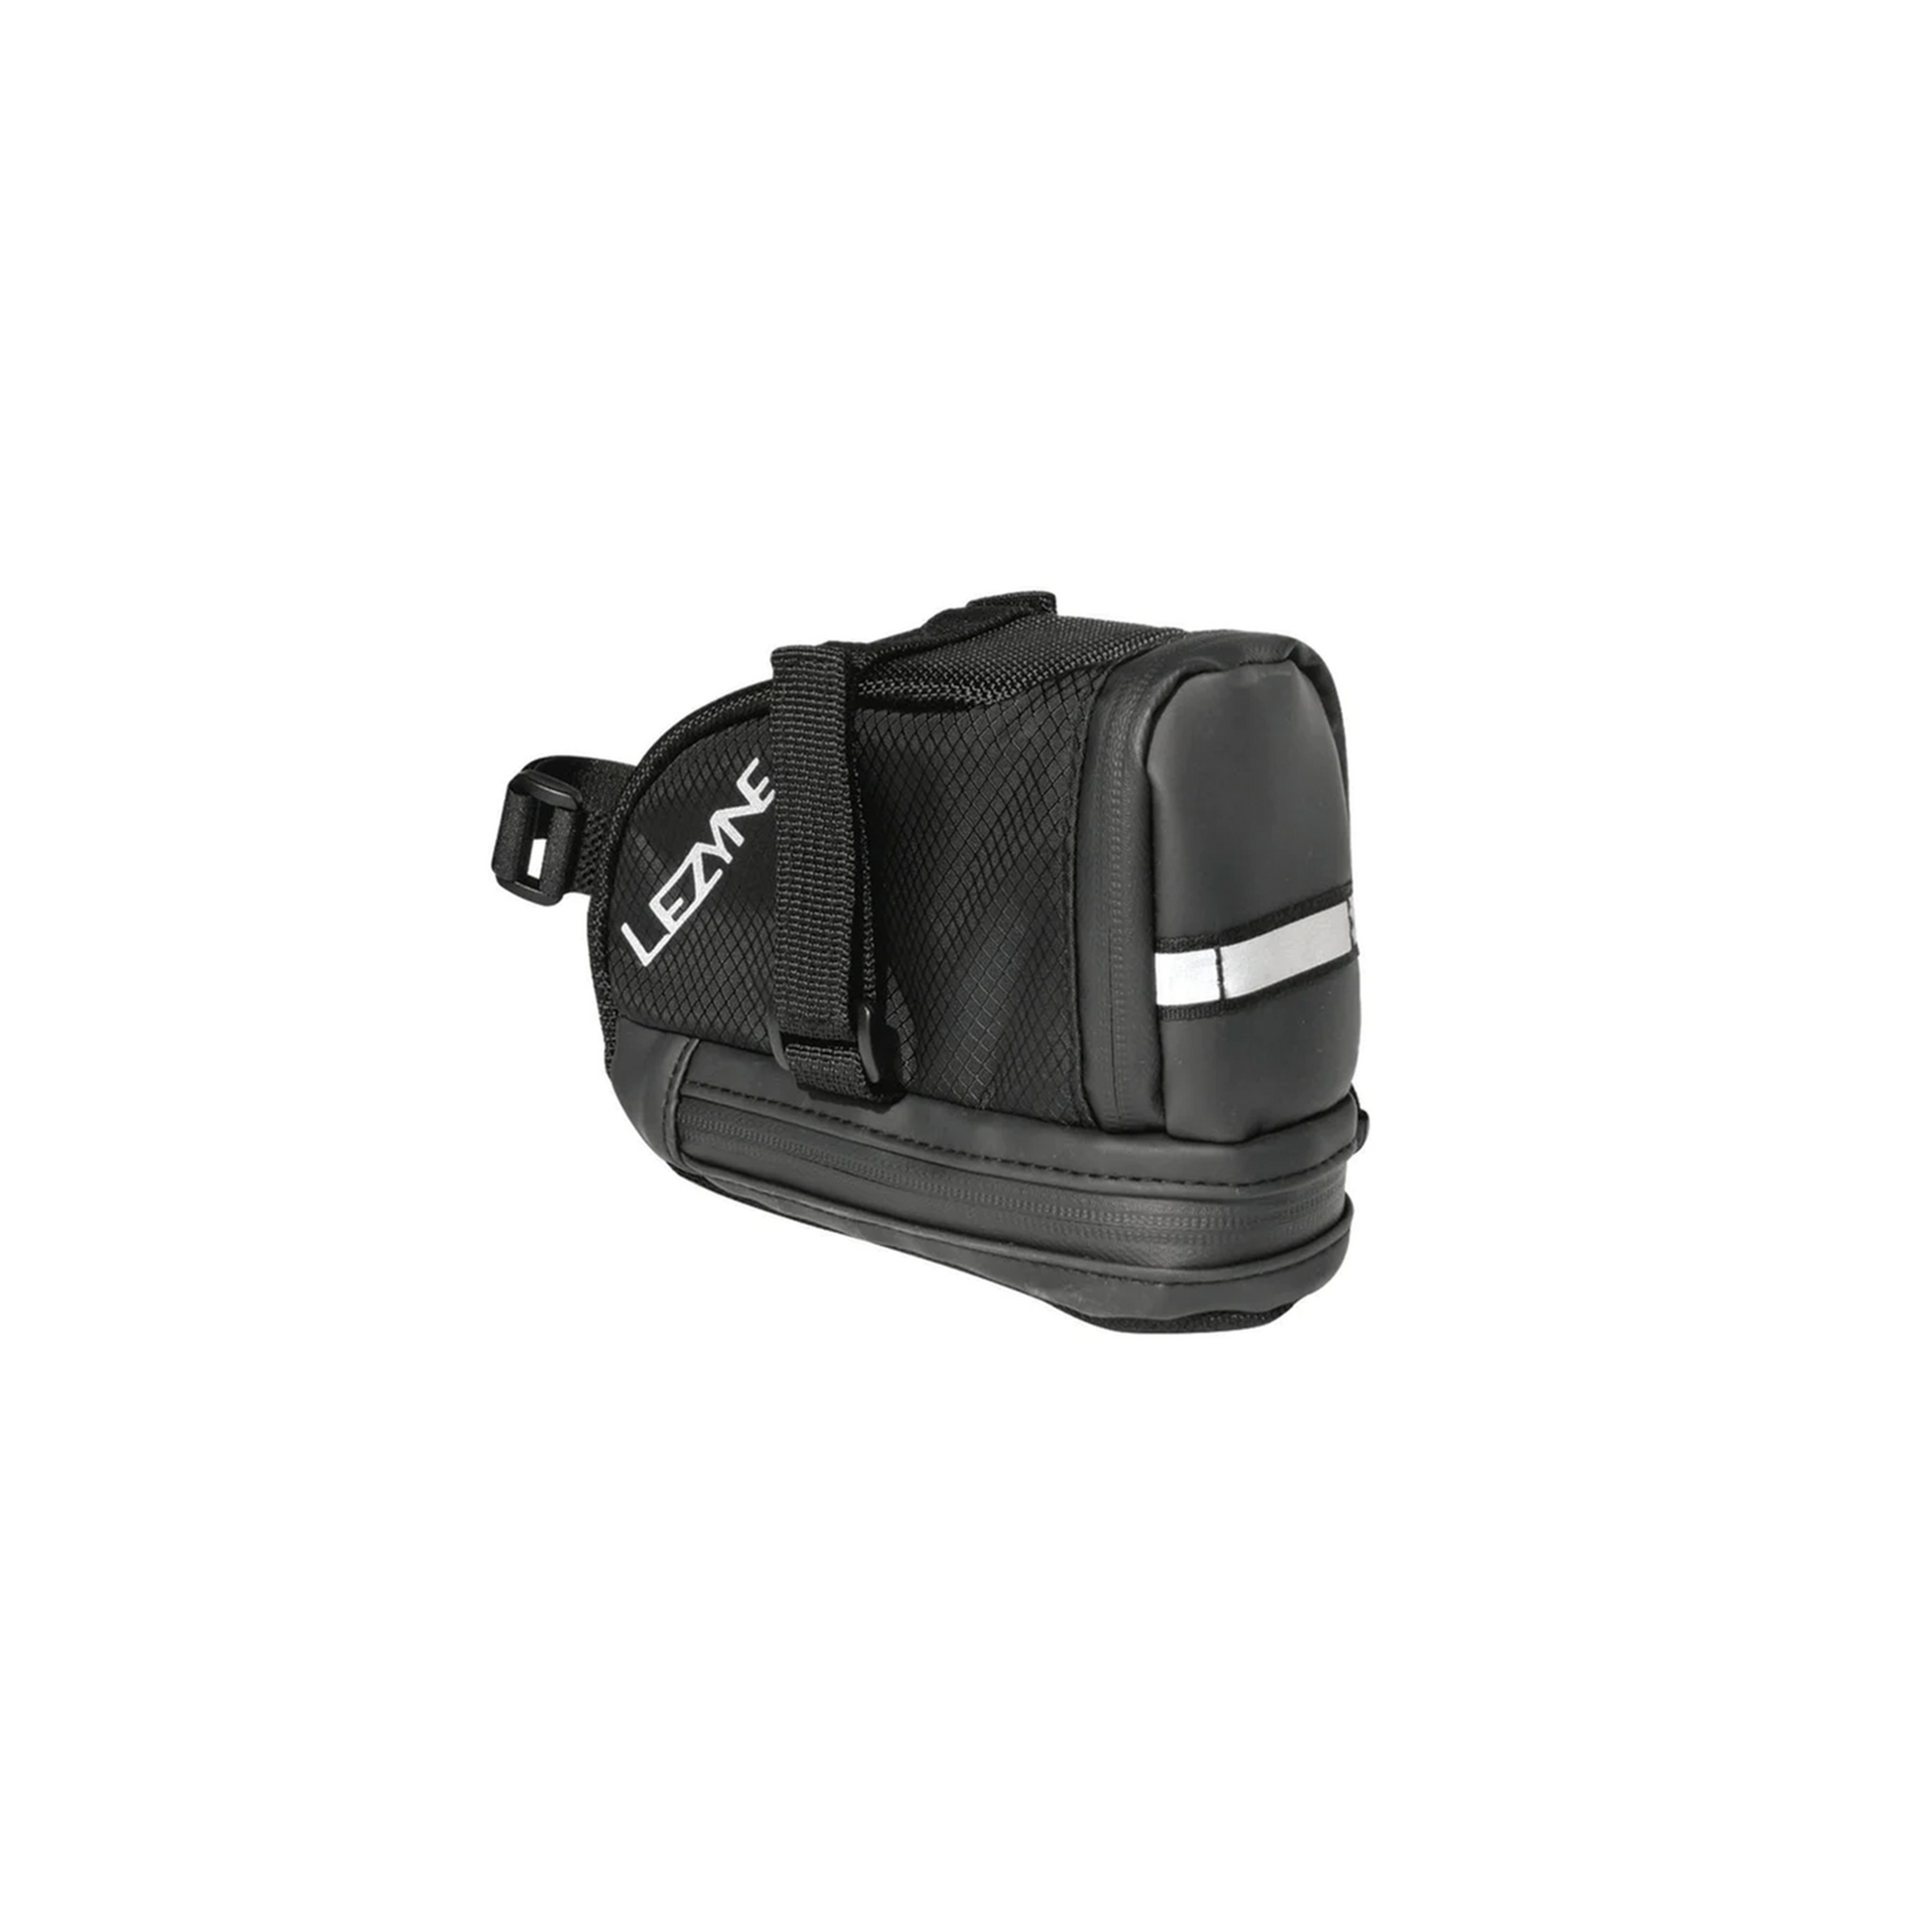 Lezyne L-Caddy Saddle Bag | Complete Cyclist - The M-Caddy is a medium, wedge-shaped saddle bag. It's built from durable woven nylon construction and features a large main compartment with labeled organizational pockets as well as a sub-compartment for a multi-tool or mobile device.